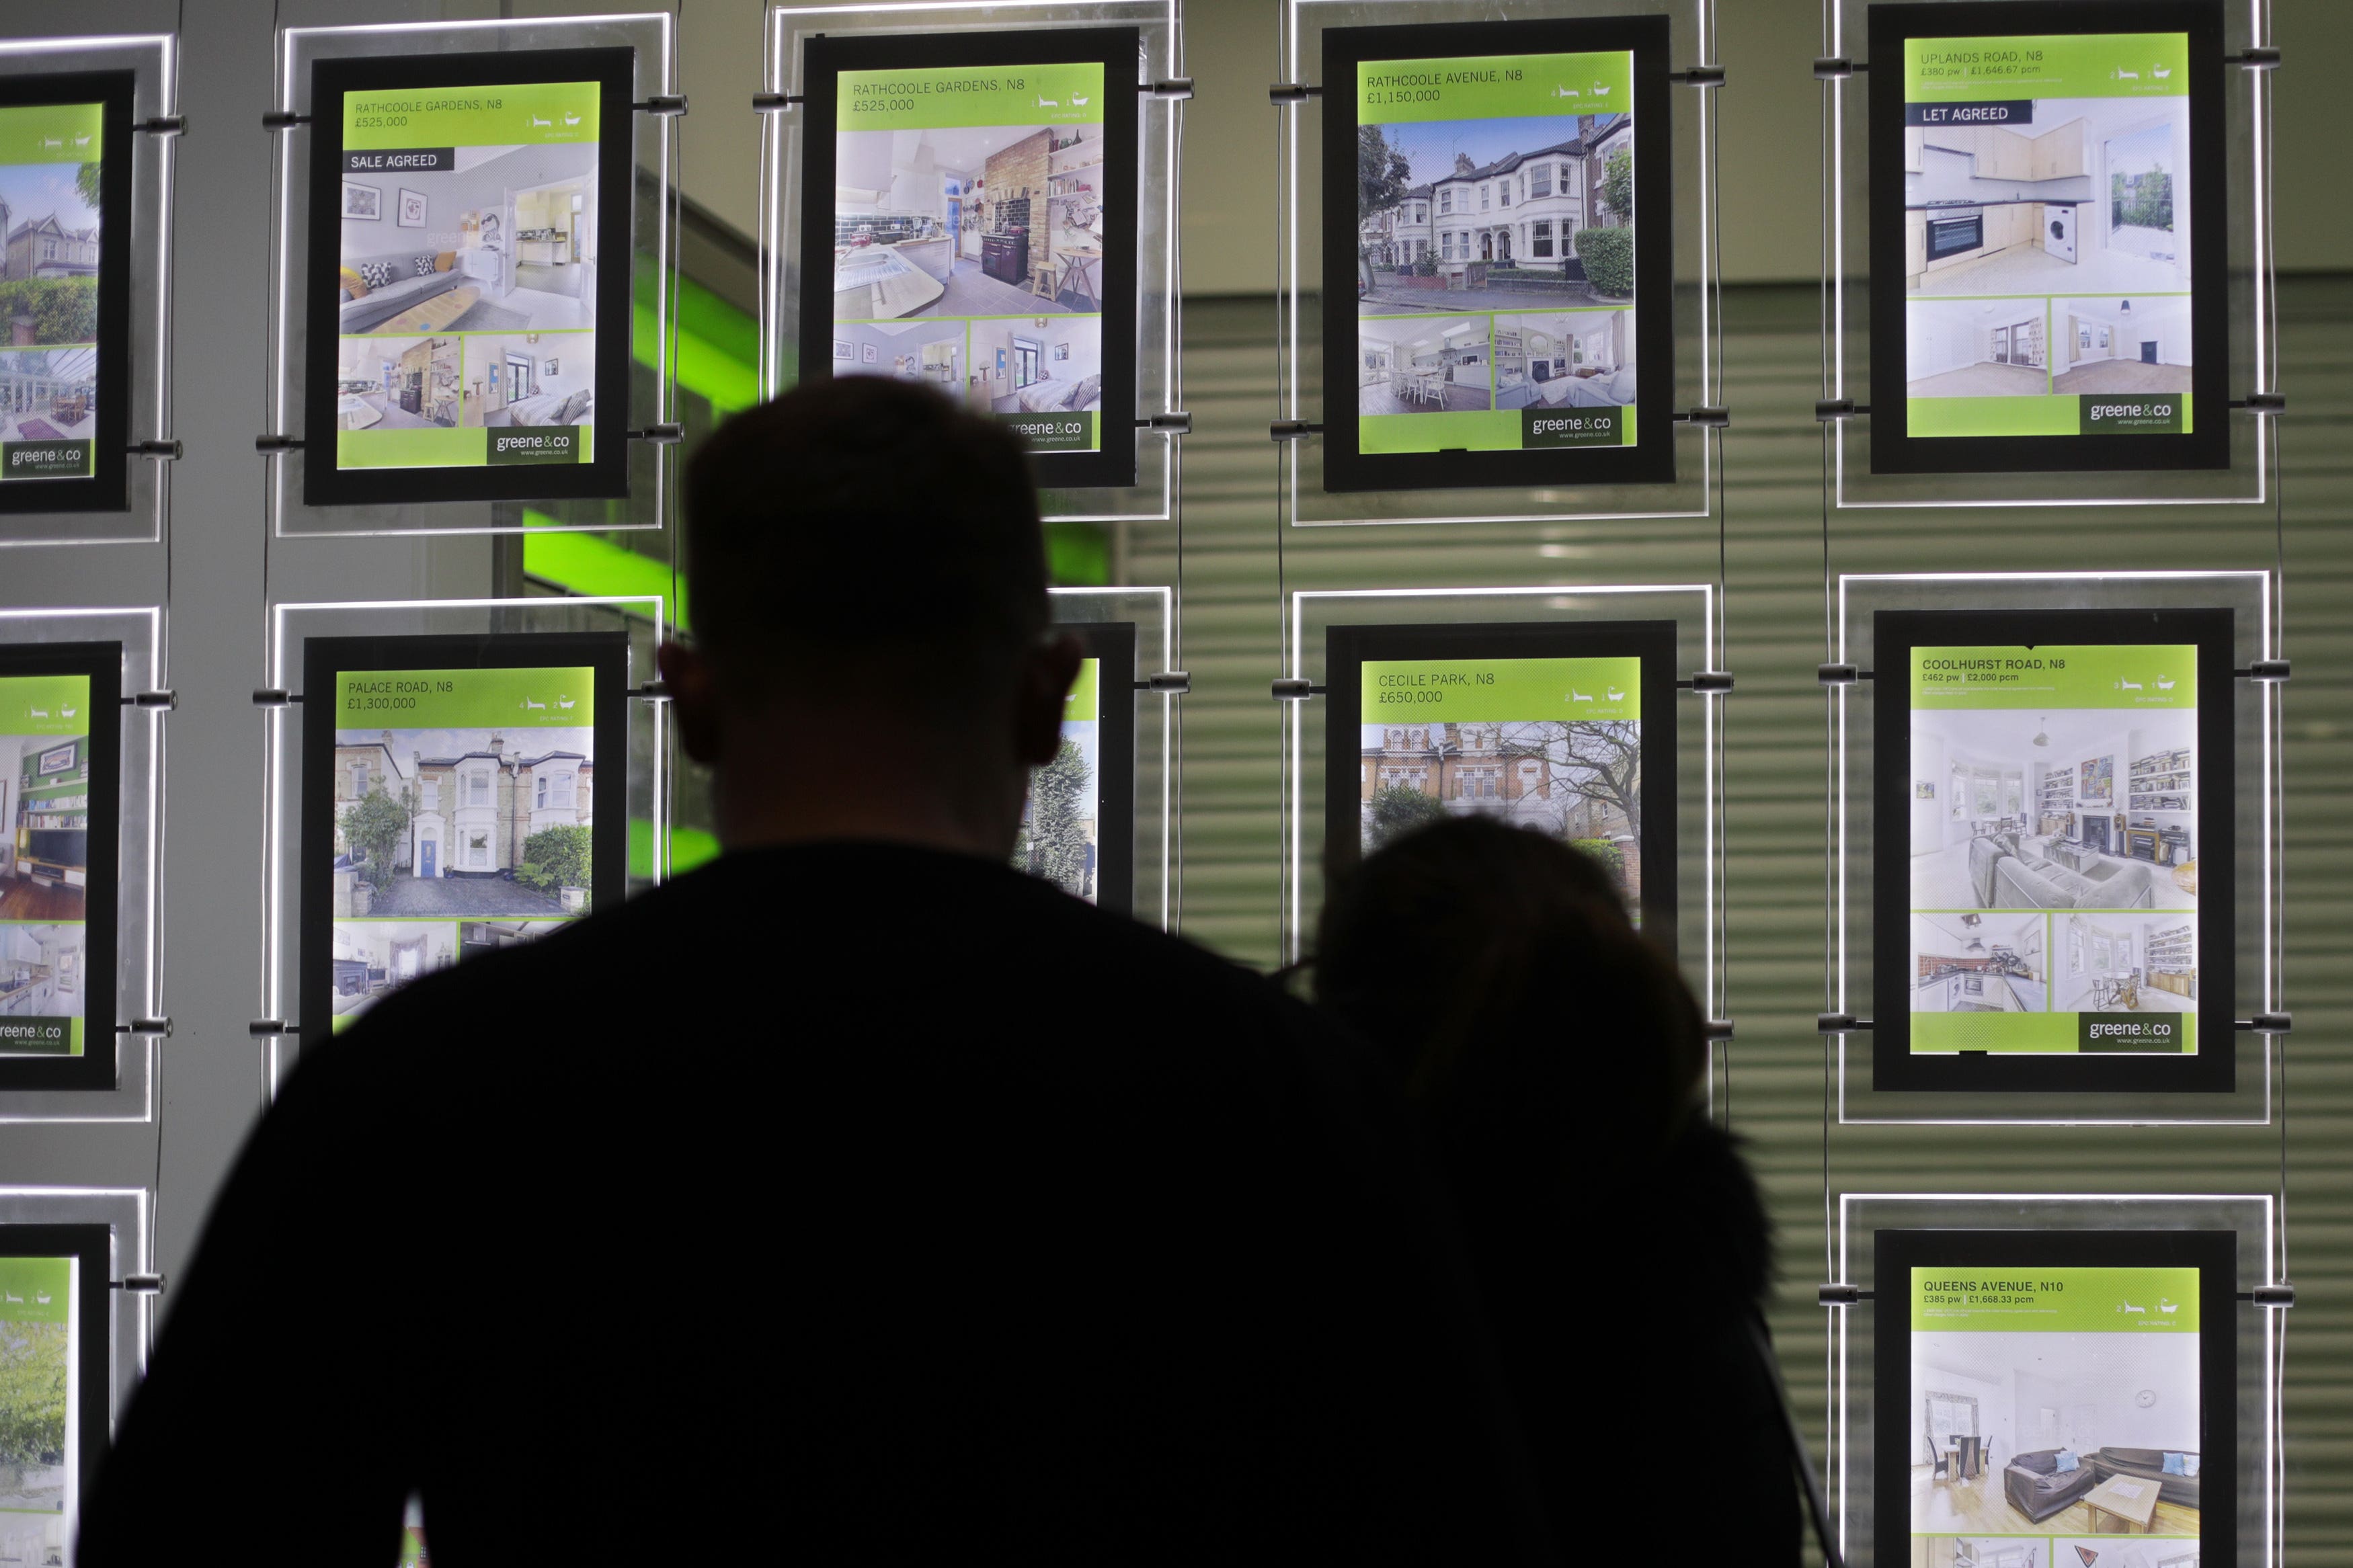 House prices are expected to tumble this year